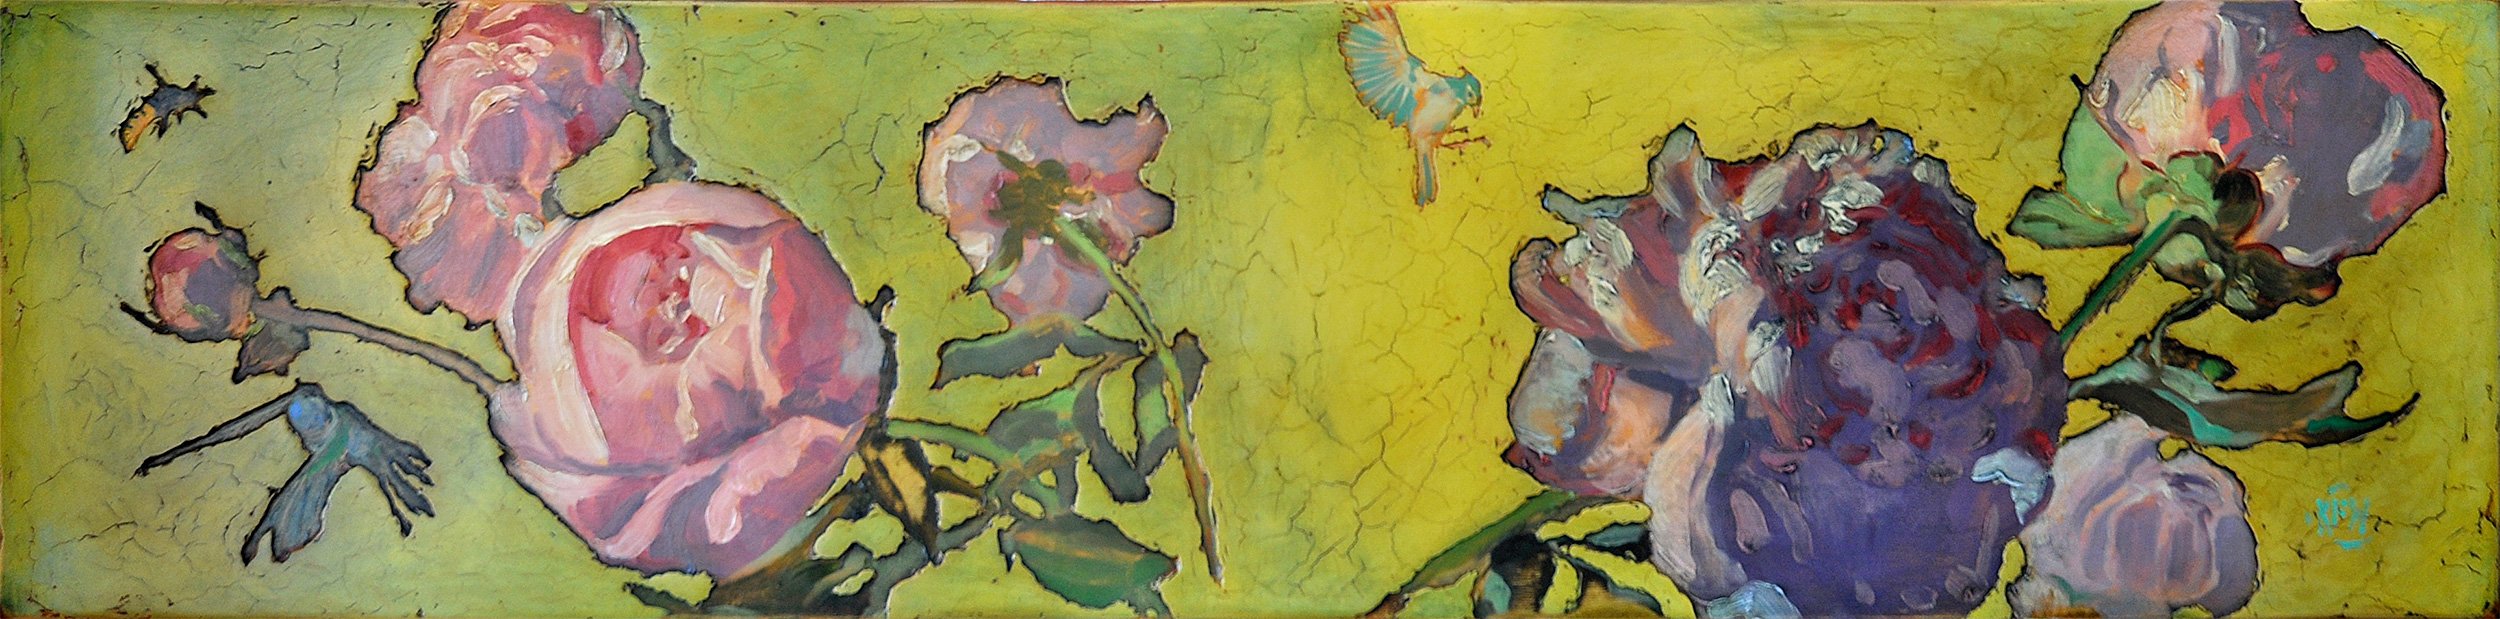 319 Peony Morning 48" x 12" Oil on wood panel SOLD